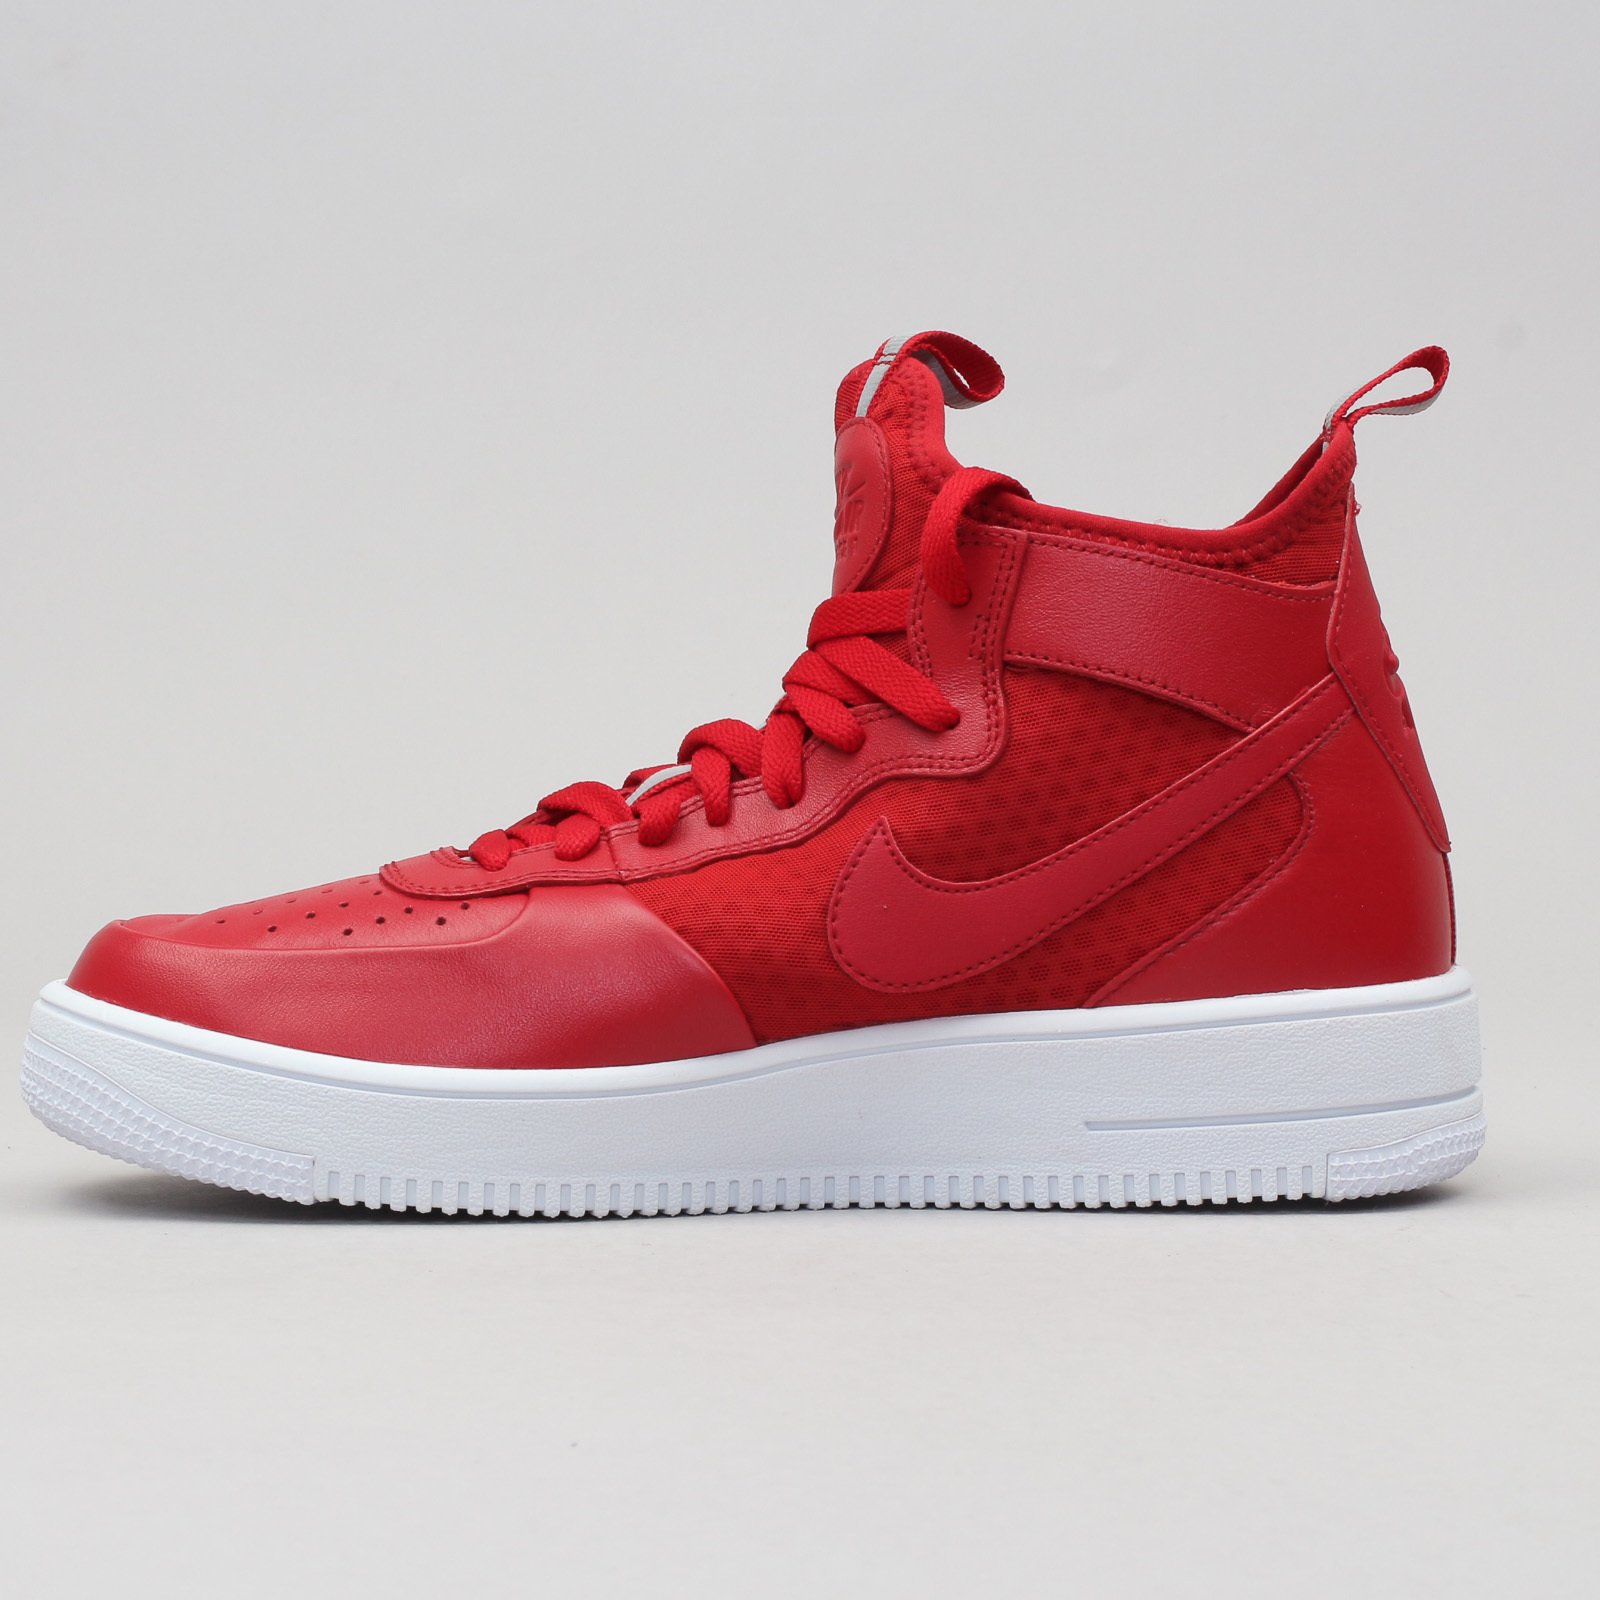 Nike Air Force 1 Mid Athletic Club White Red